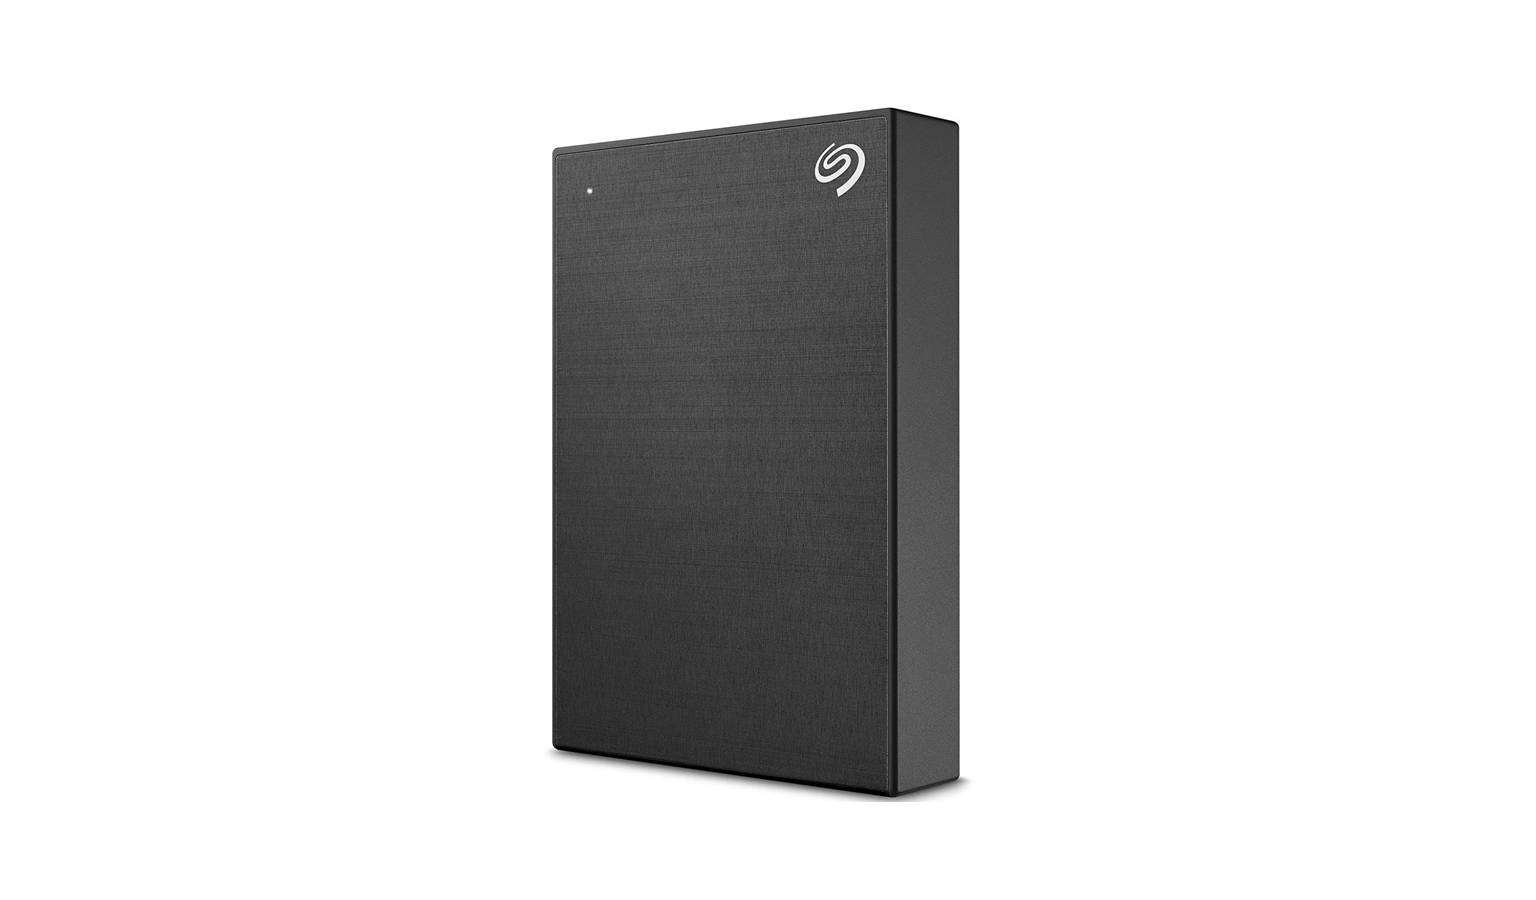 access seagate drive for mac on pc